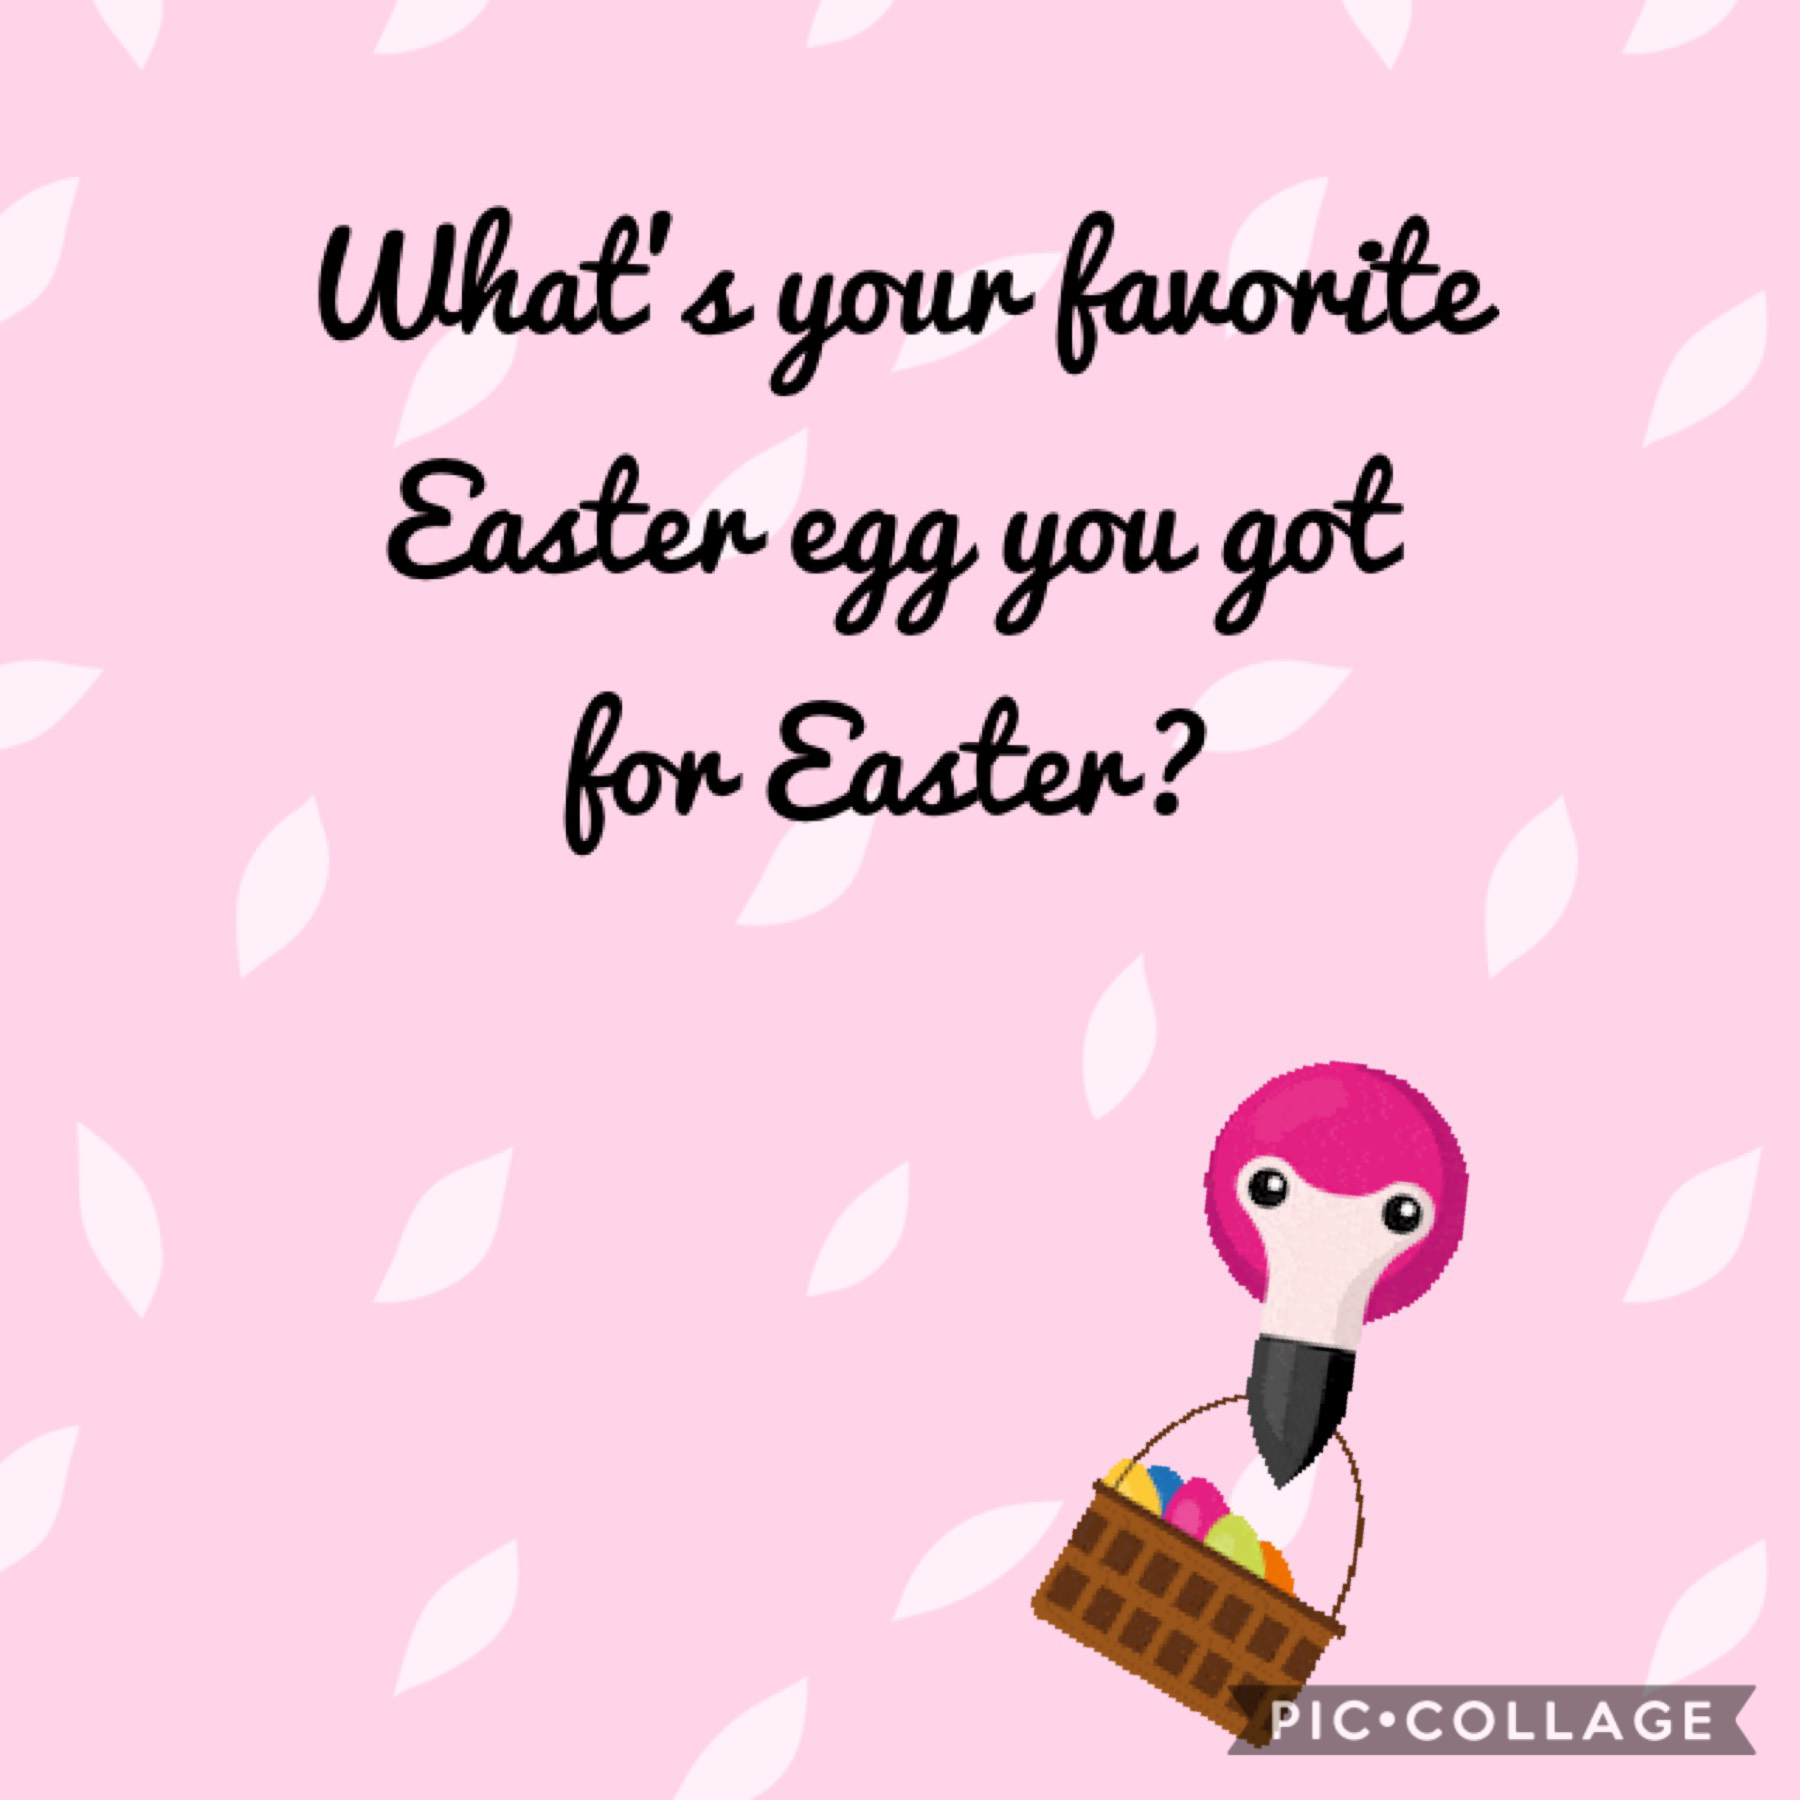 Comment your favorite egg!